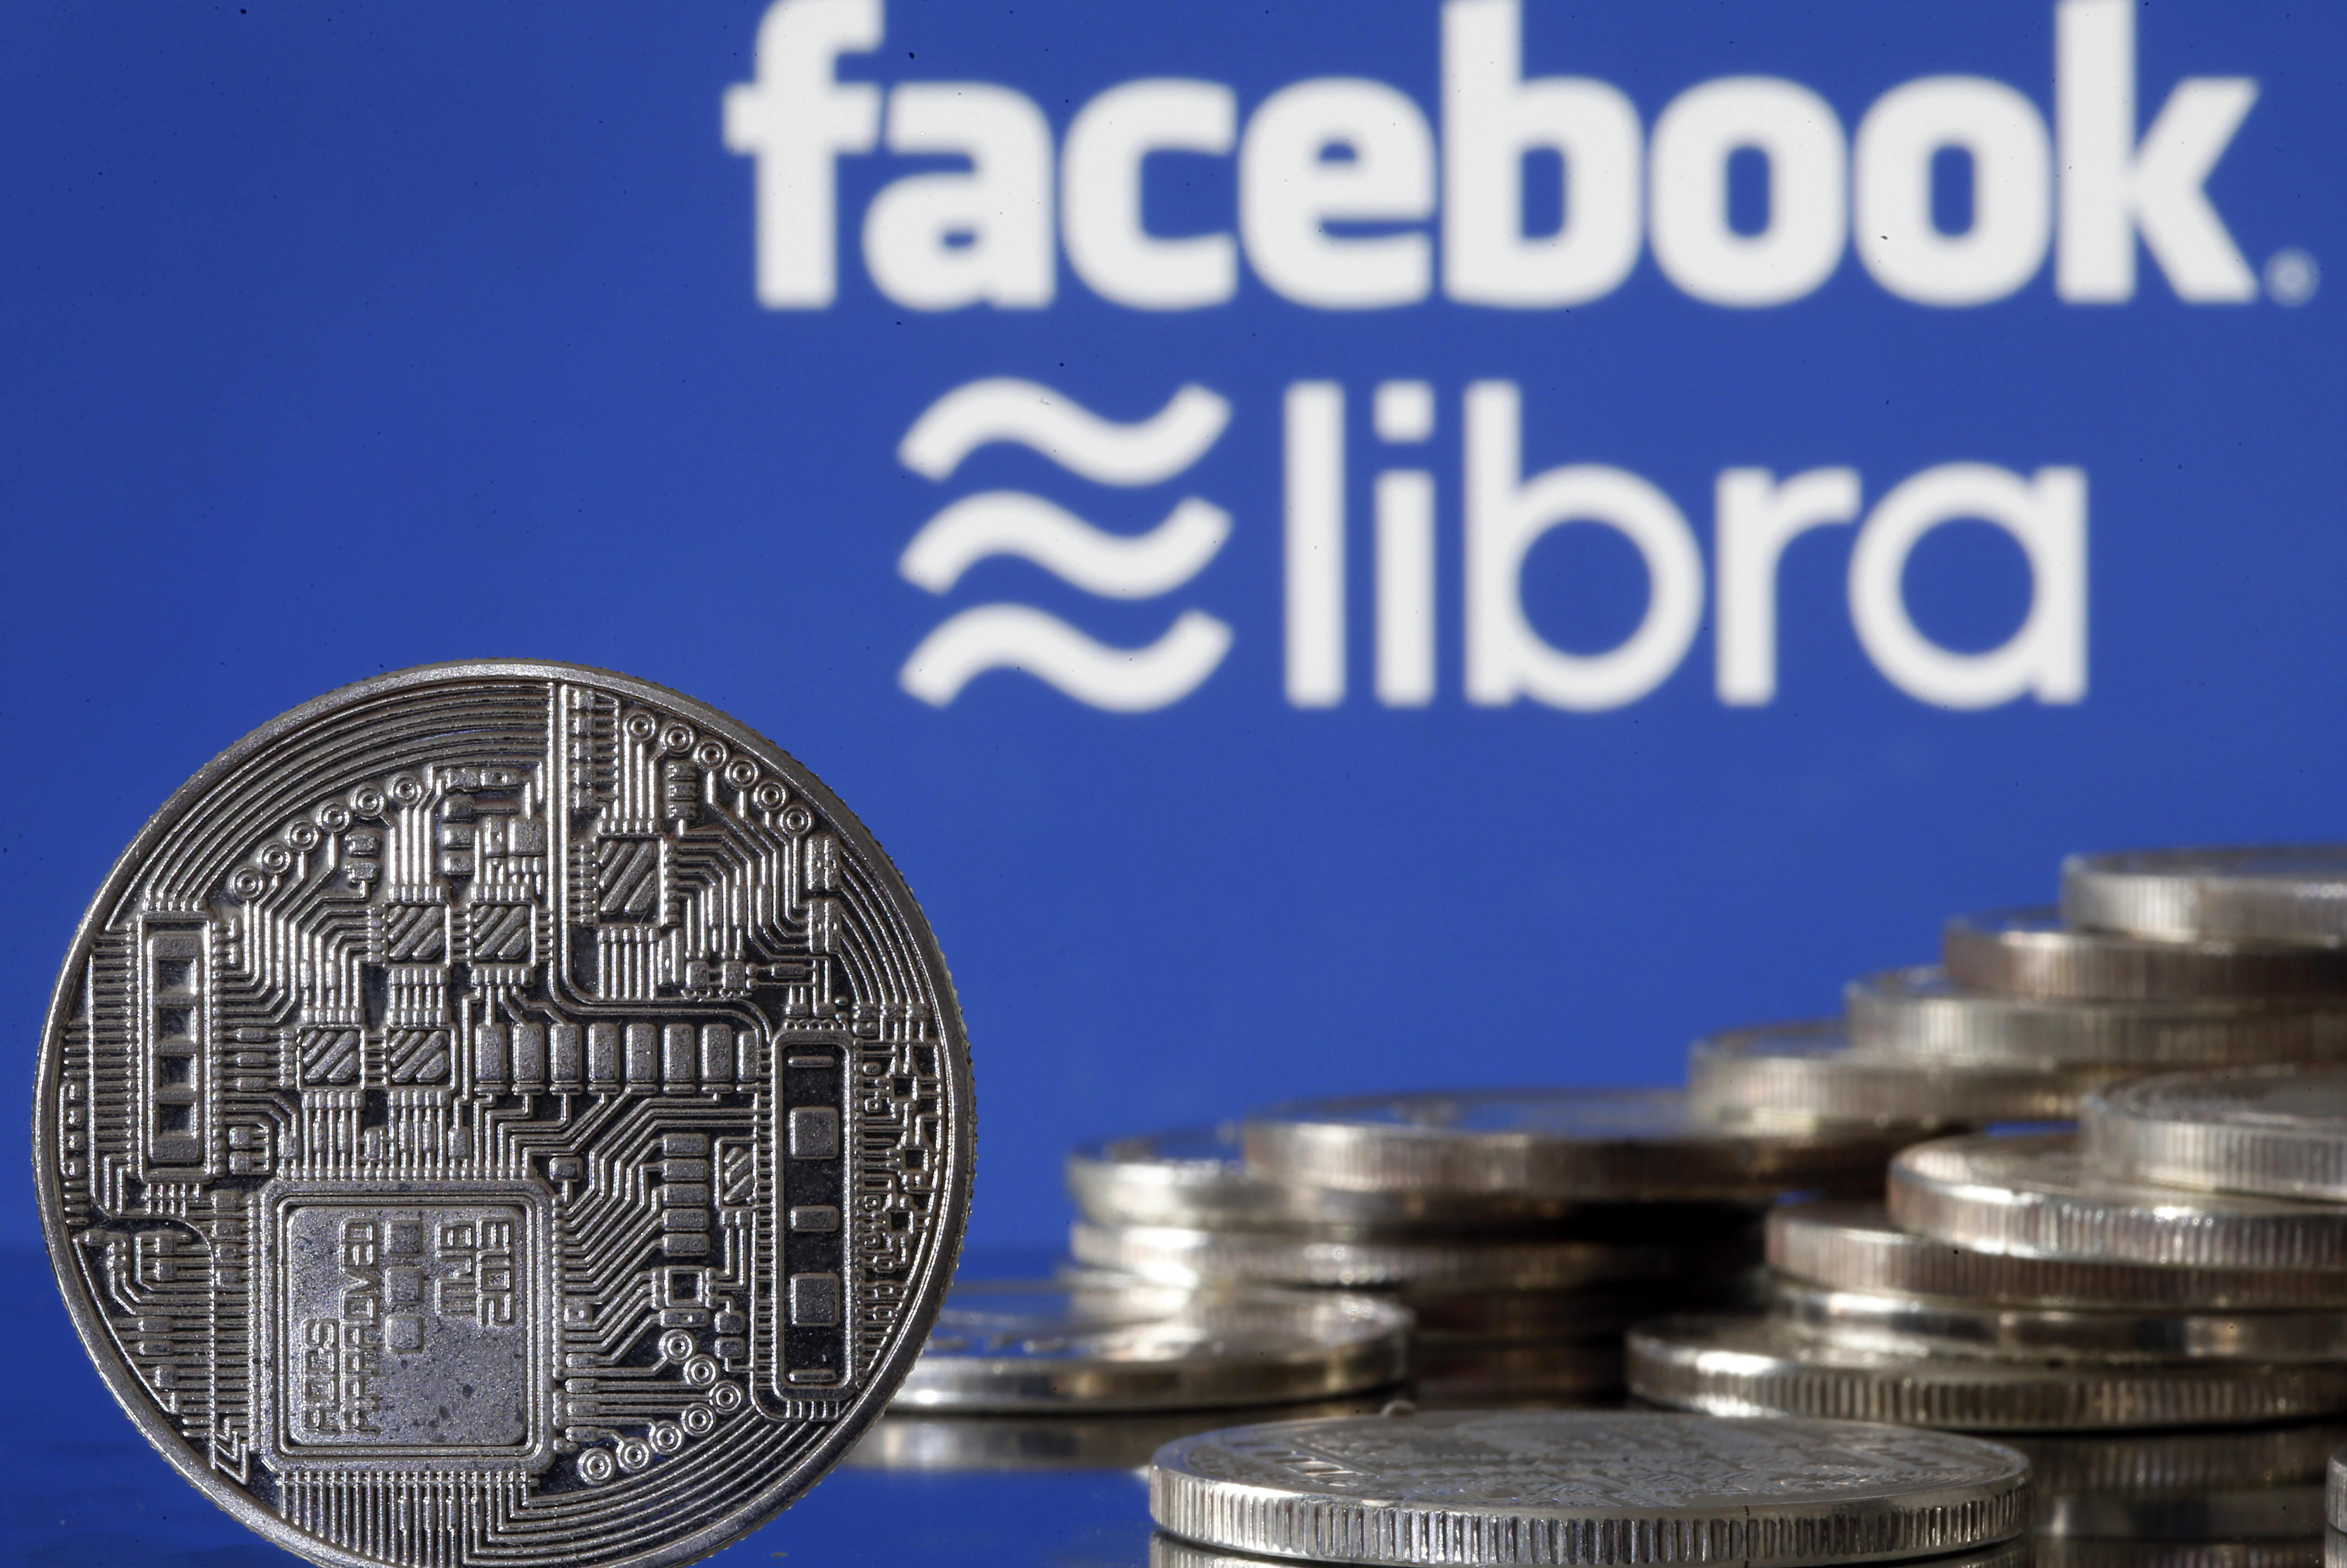 Libra: Facebook launches cryptocurrency in bid to shake up global finance | Facebook | The Guardian